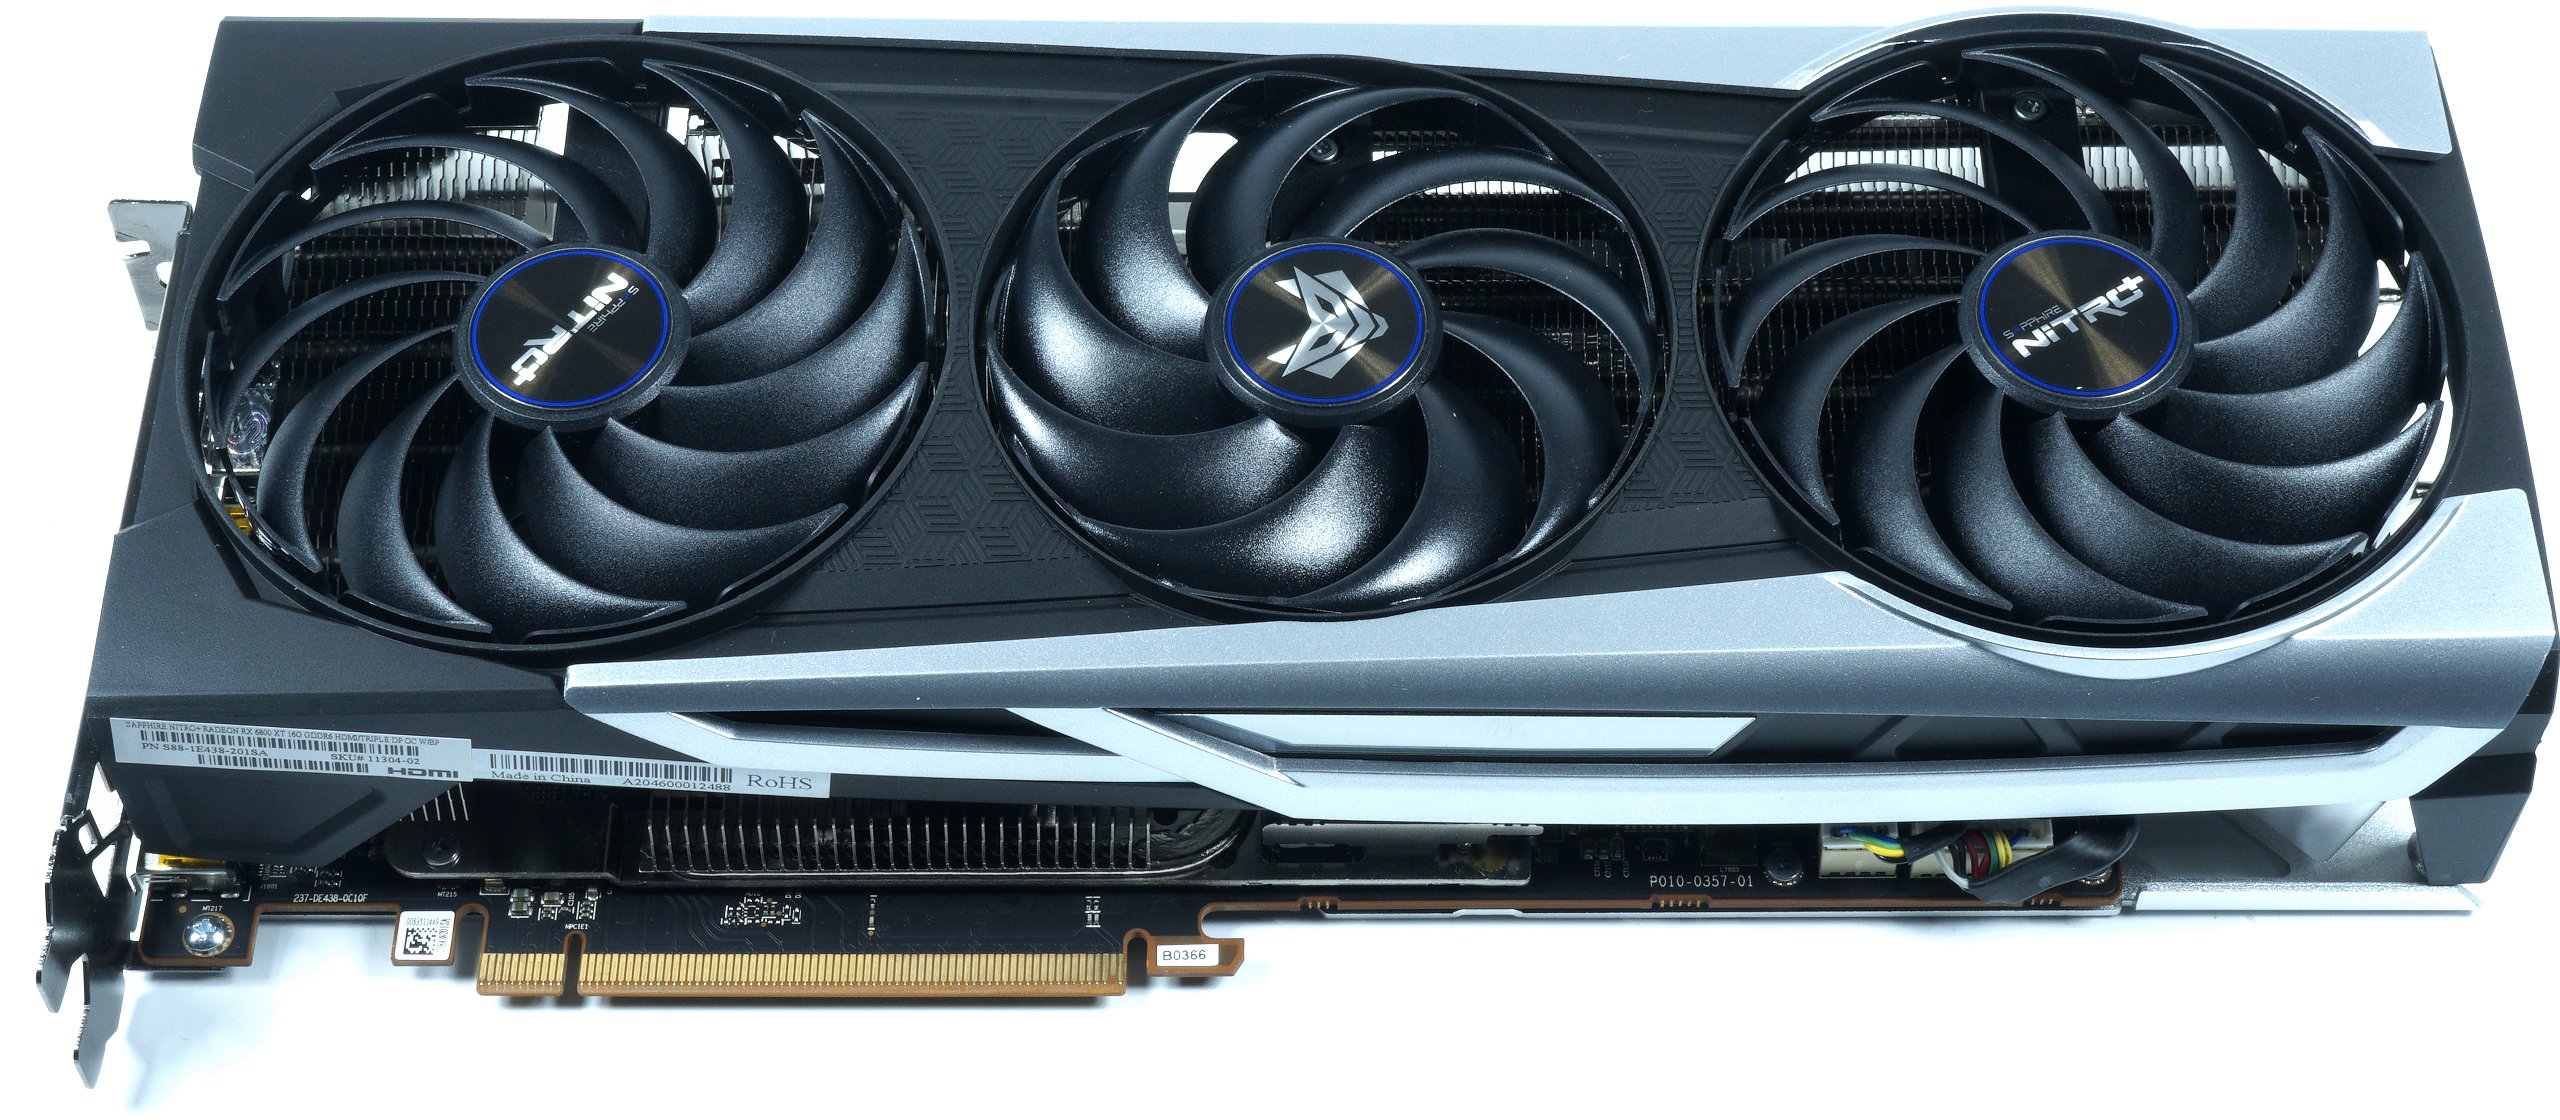 Sapphire Radeon RX 6800 XT Nitro+ in the test - It also goes